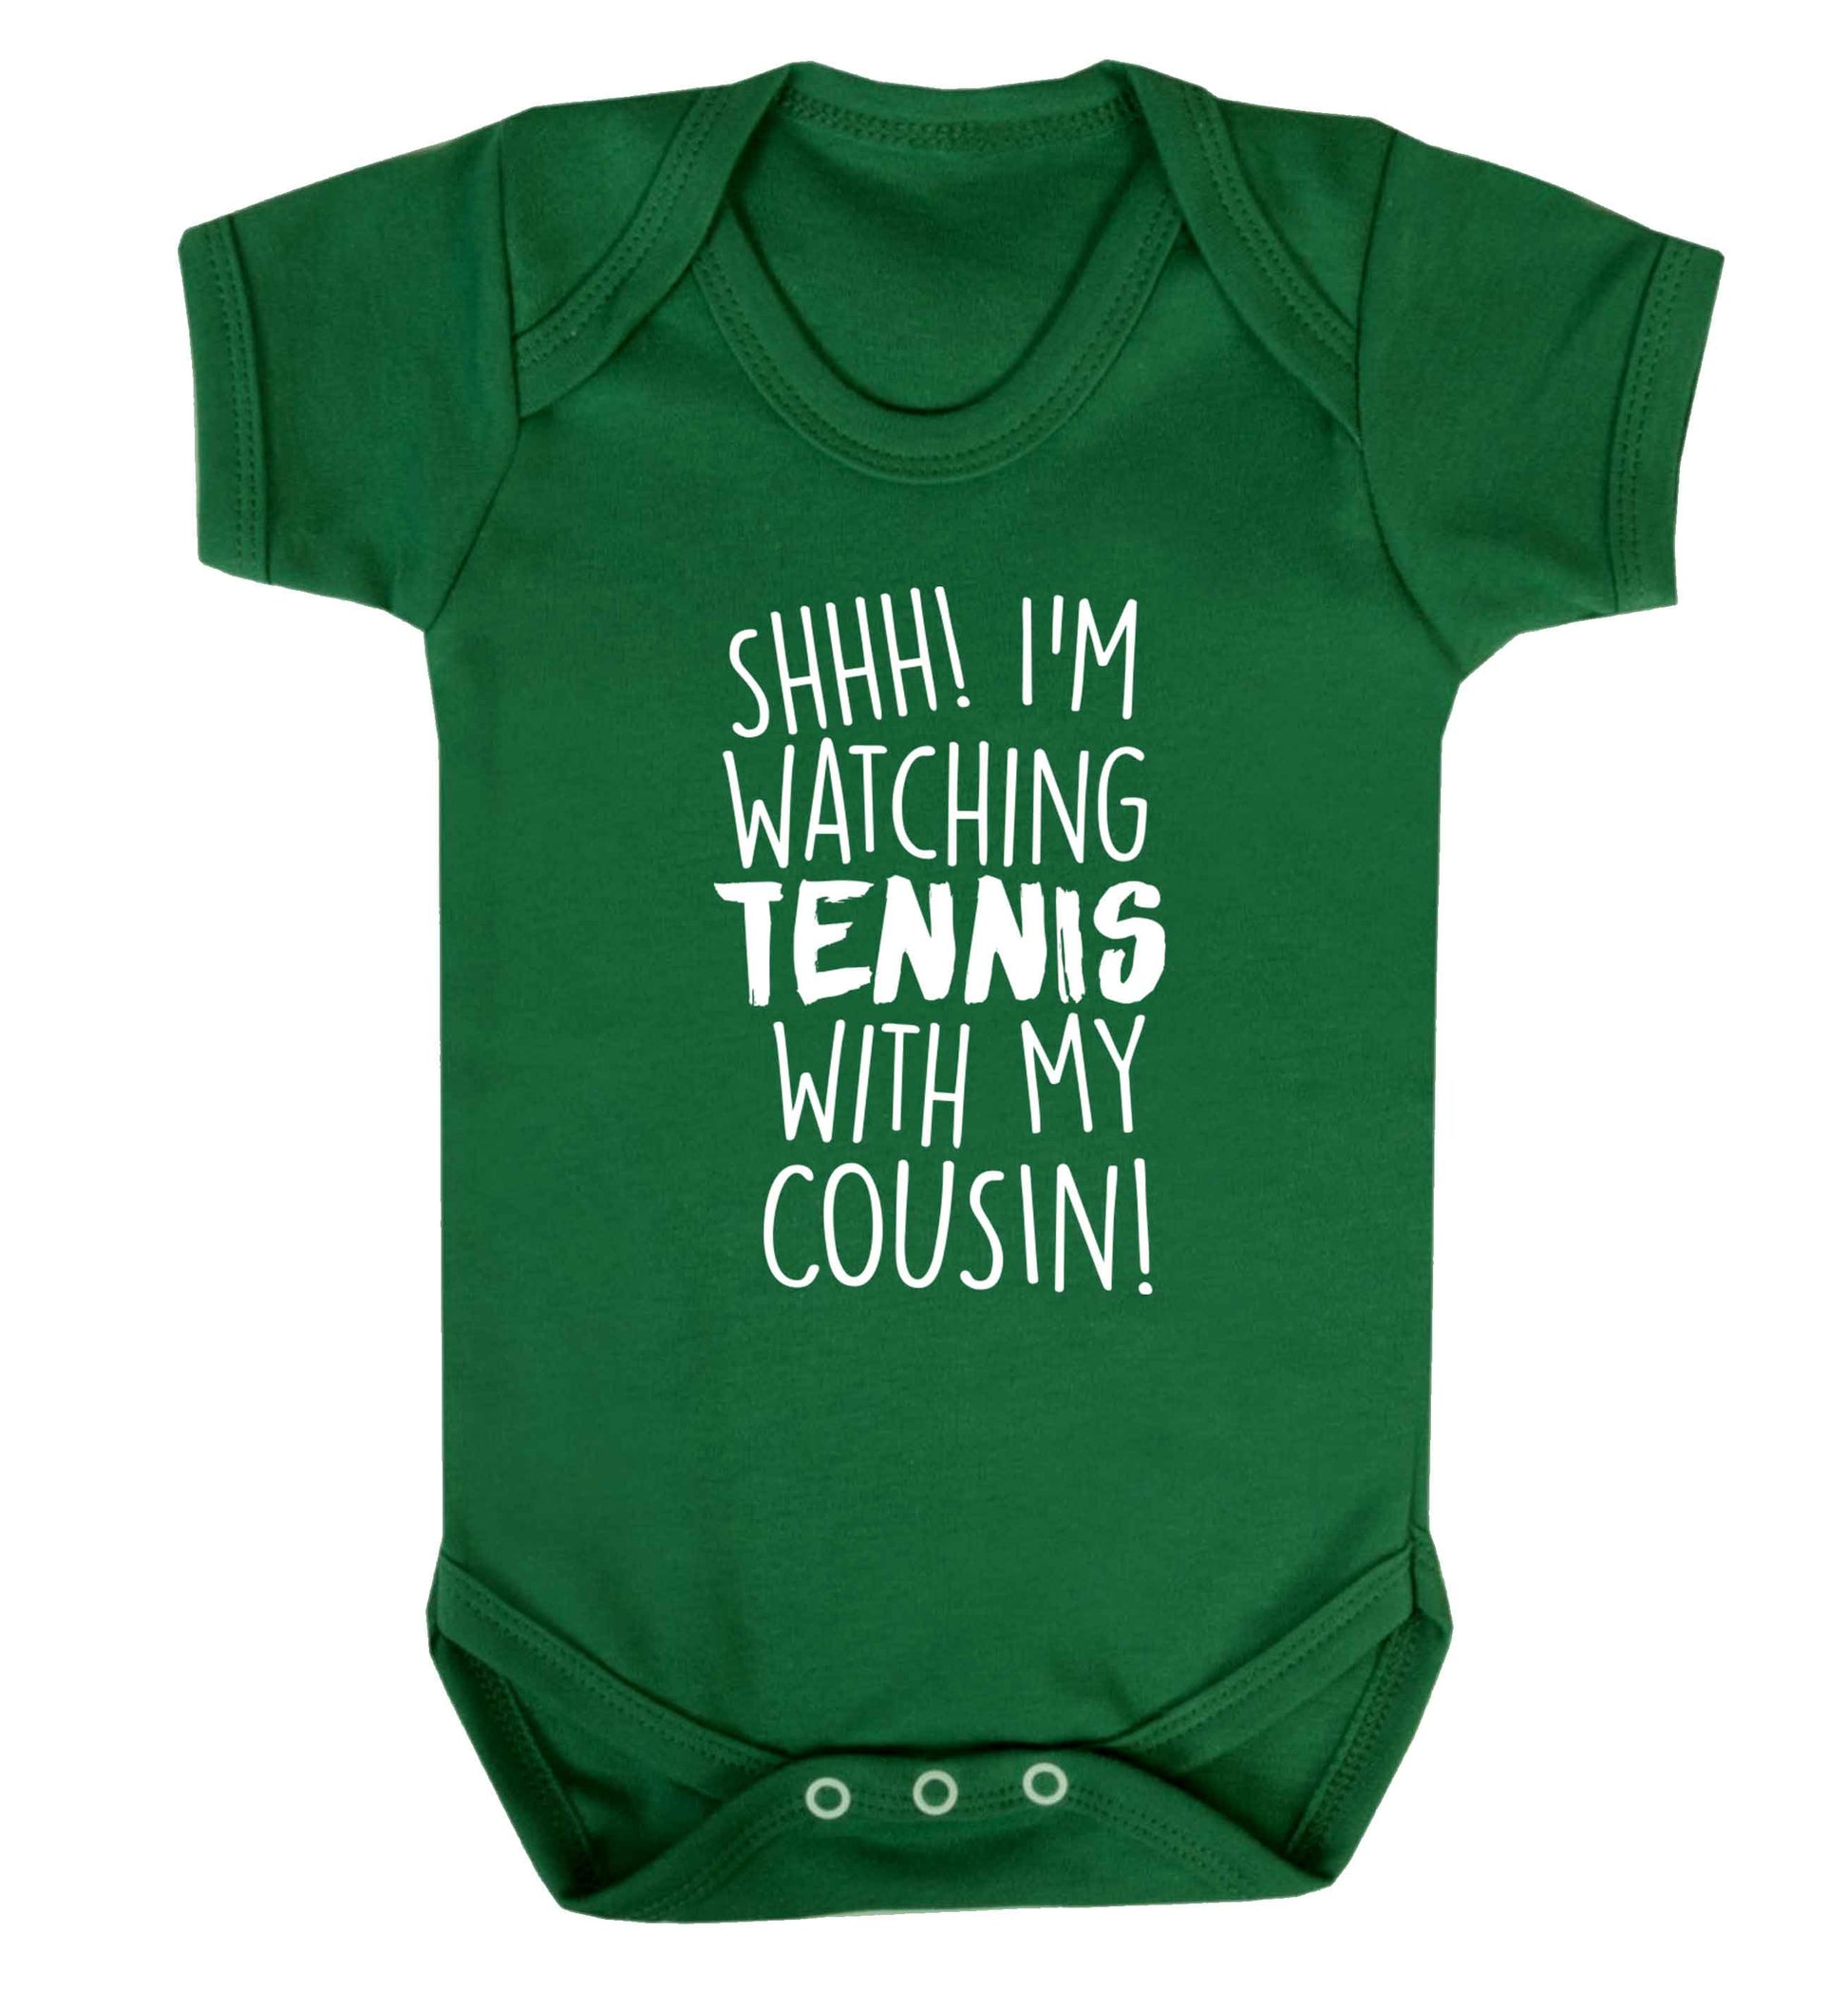 Shh! I'm watching tennis with my cousin! Baby Vest green 18-24 months